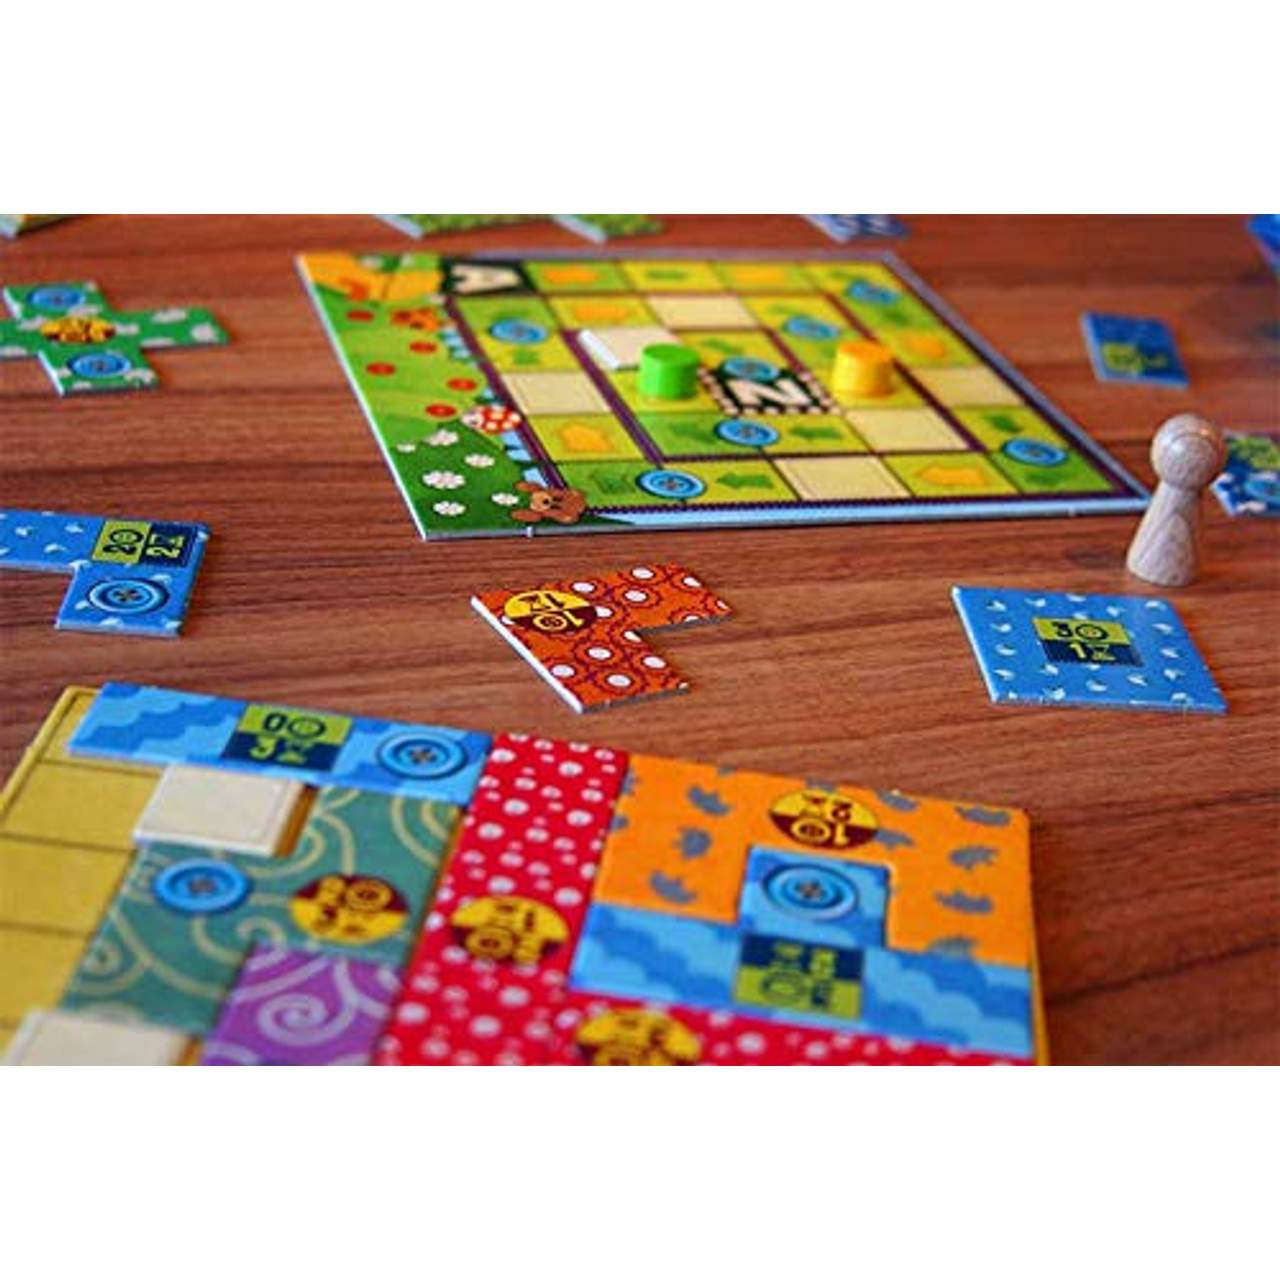 Lookout Games 22160105 Patchwork Express